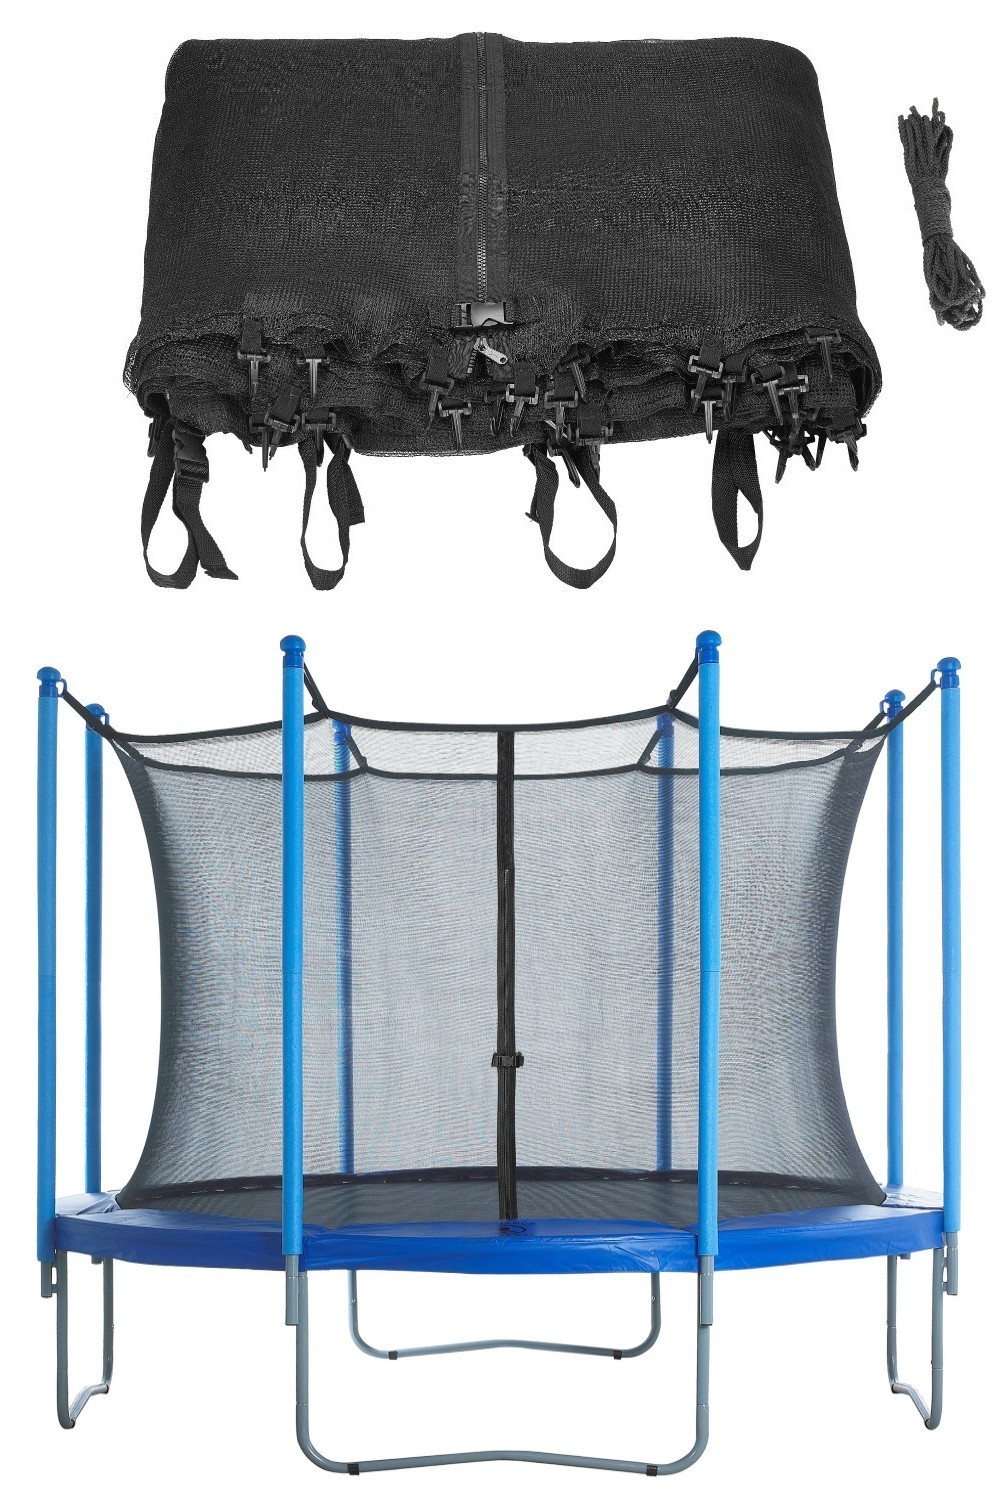 Trampoline Replacement Enclosure Safety Net, fits for 8 FT. Round Frames using 8 Poles or 4 Arches - Net Only